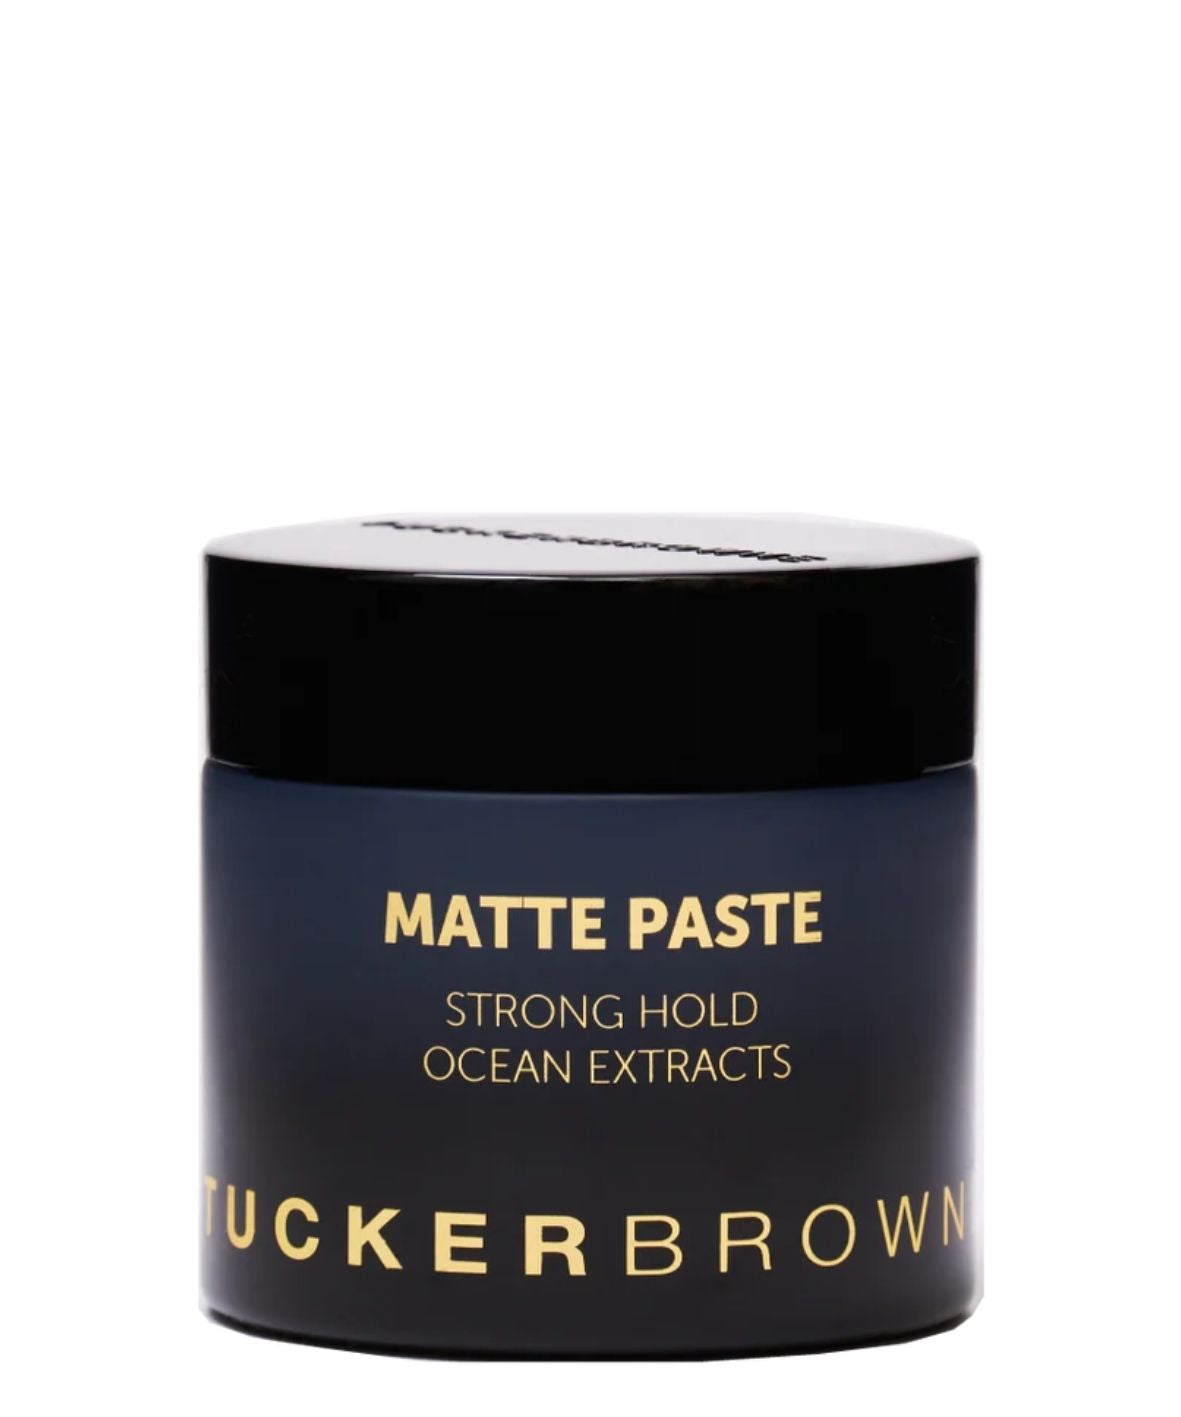 MATTE PASTE/ STRONG HOLD